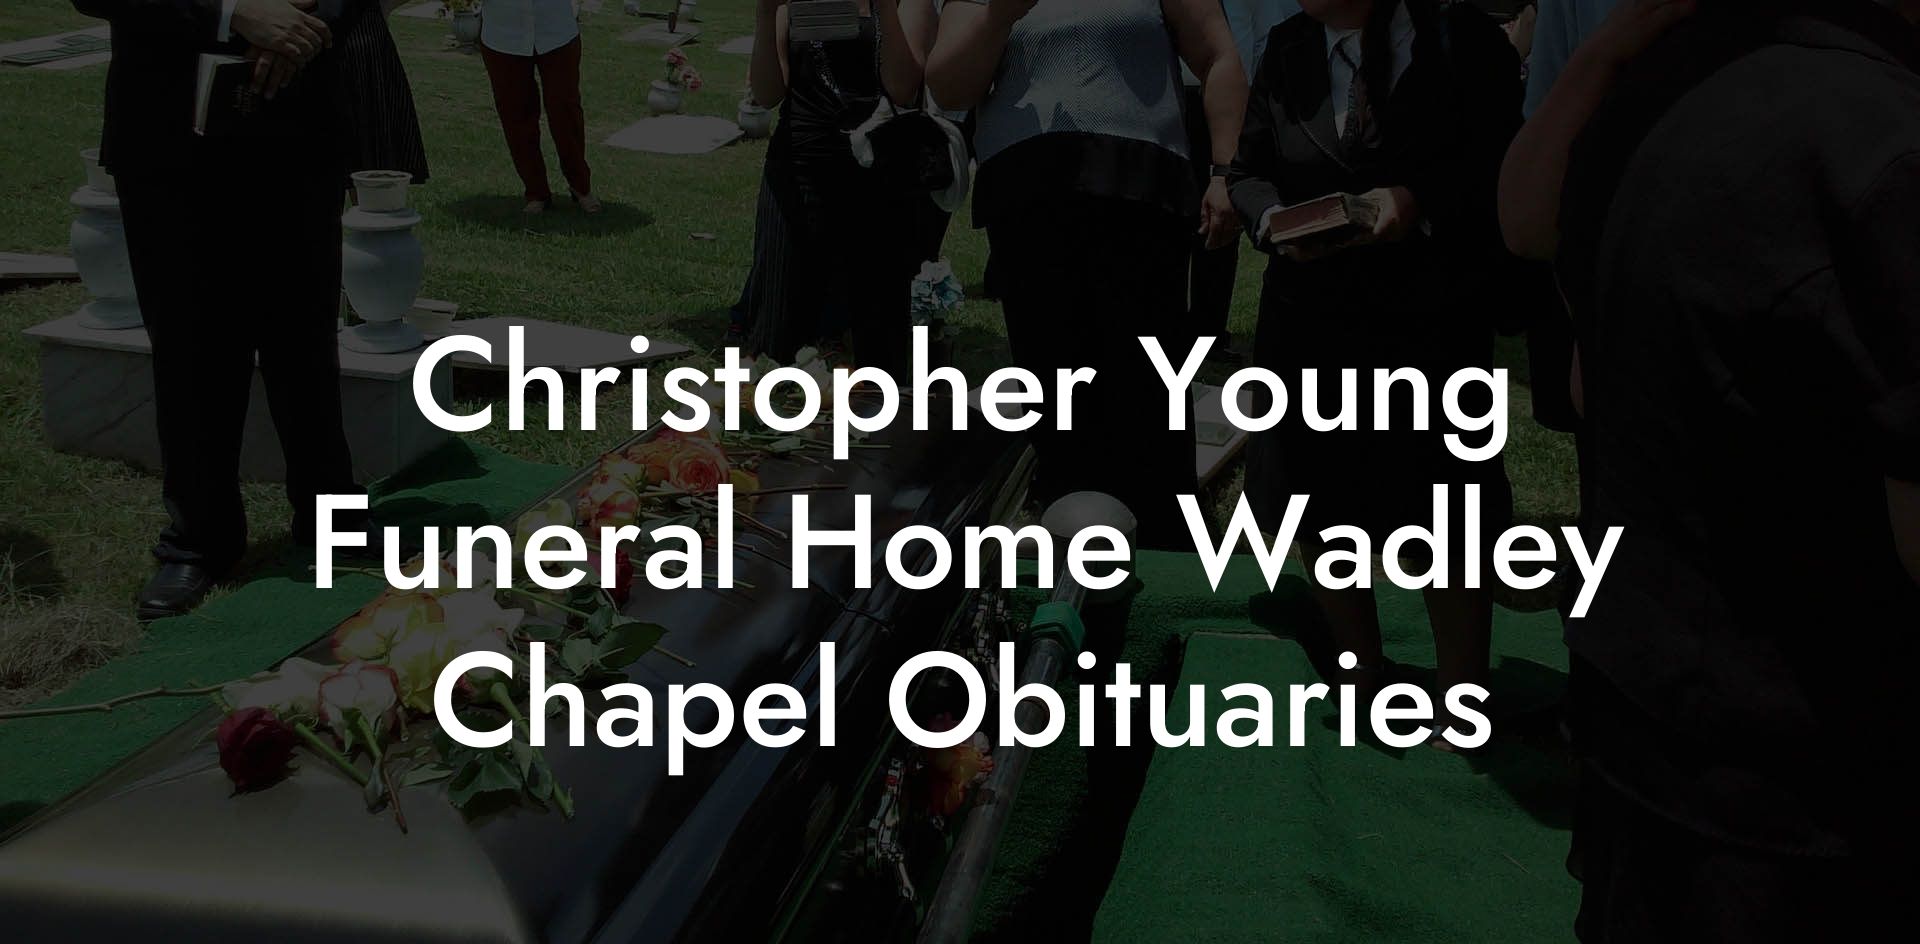 Christopher Young Funeral Home Wadley Chapel Obituaries